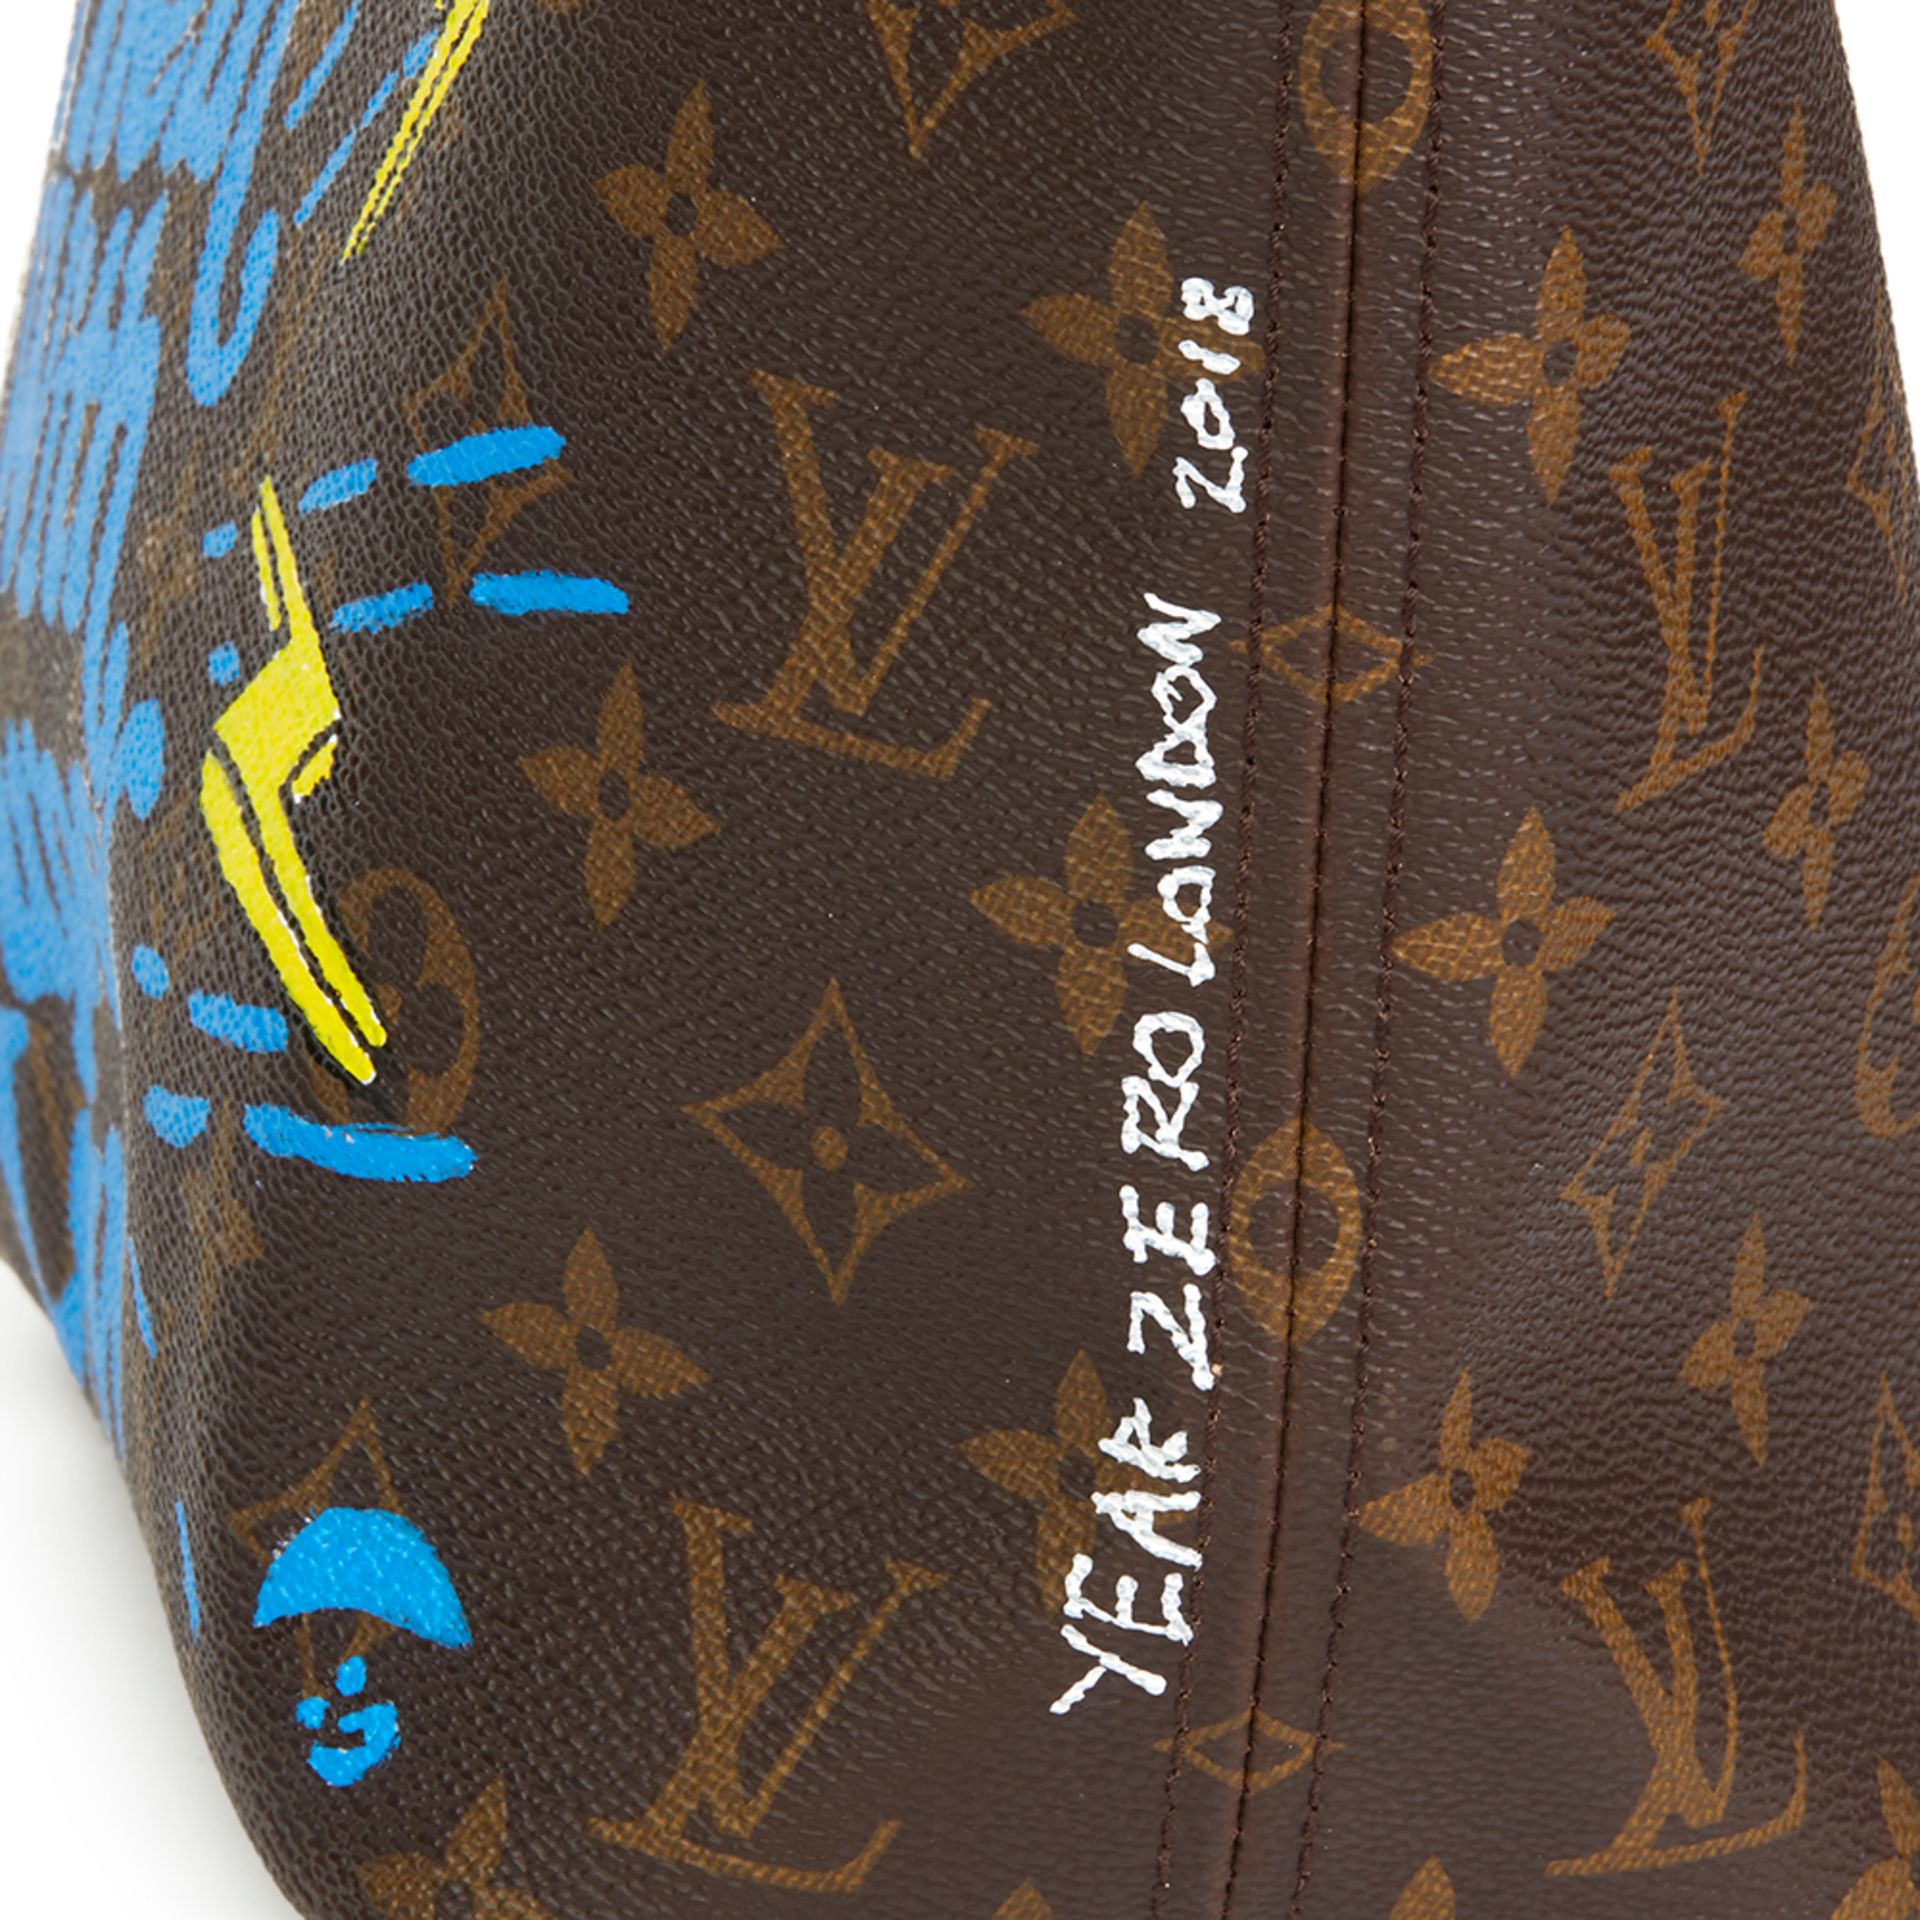 Louis Vuitton X Year Zero London Hand-Painted ‘Zap Them With Super Love’  Brown Monogram Coated Canv - Image 6 of 11